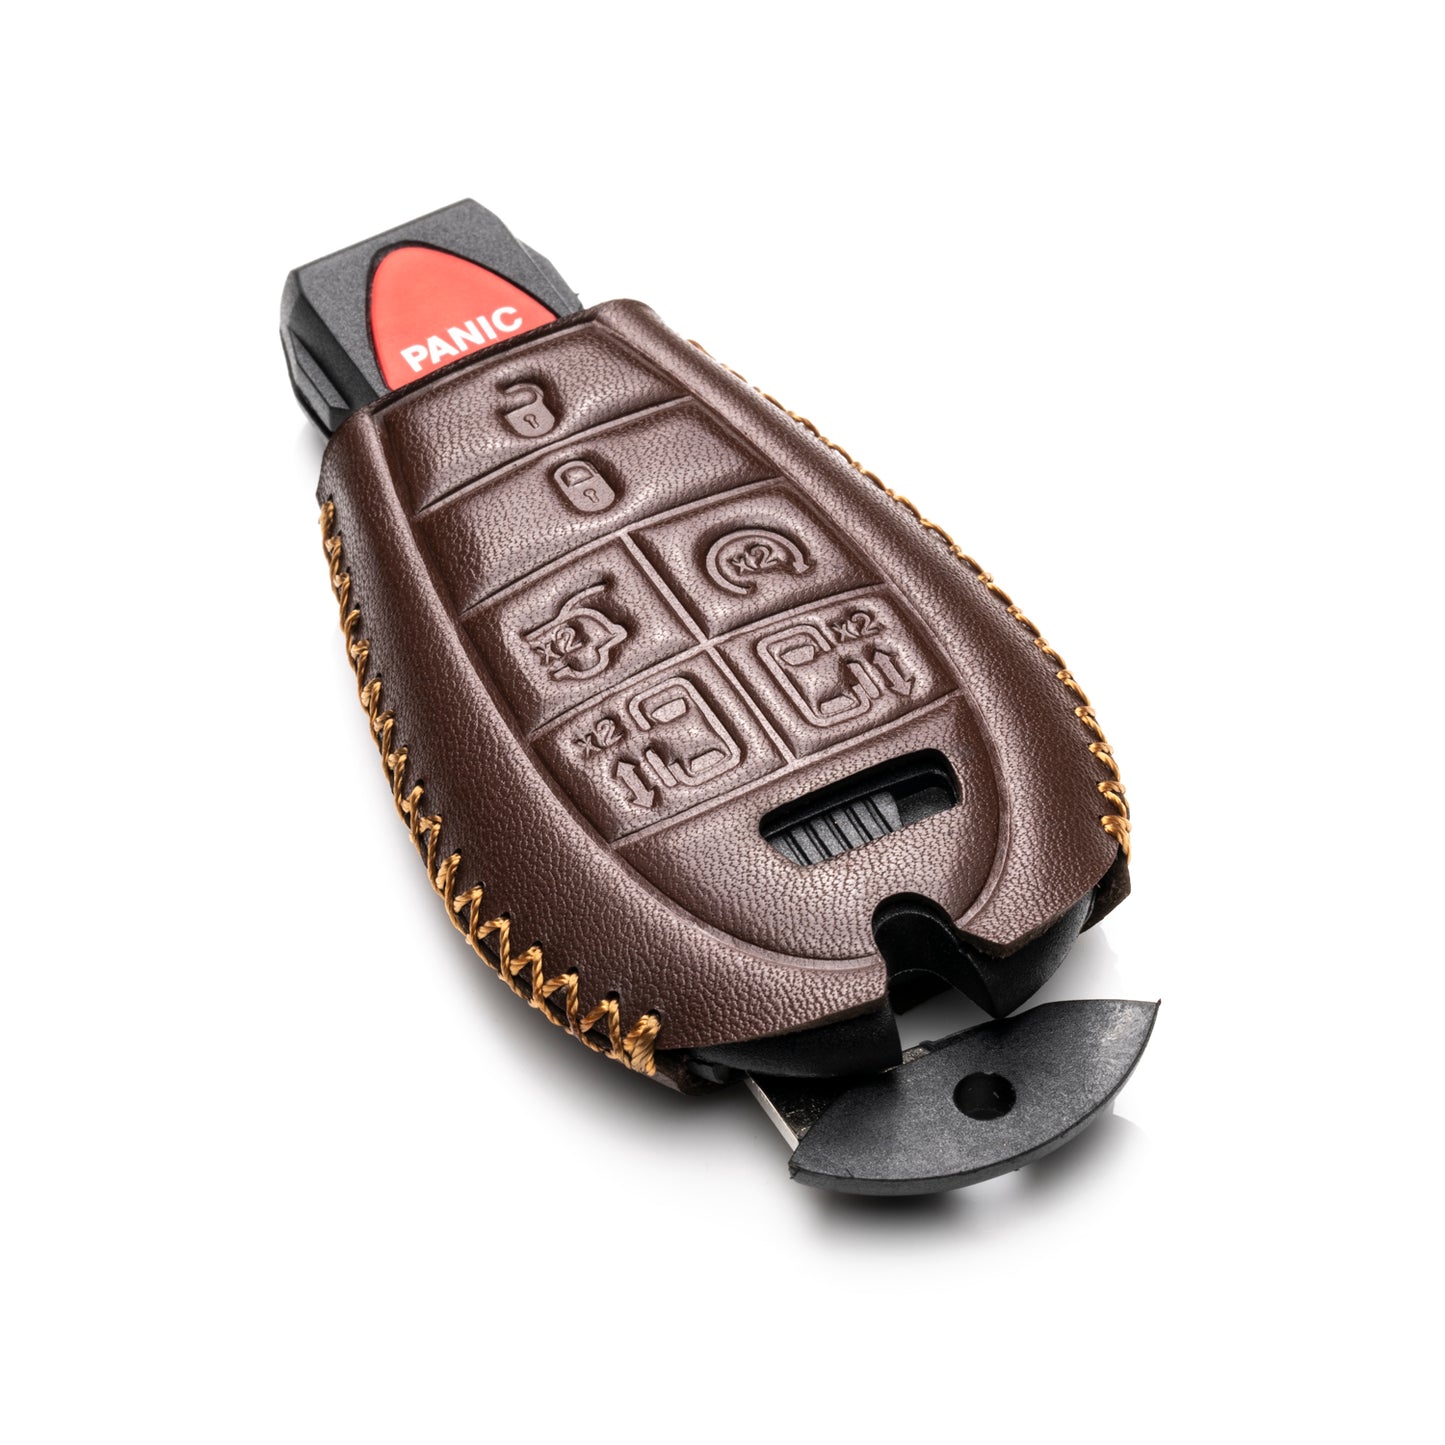 Vitodeco Genuine Leather Smart Key Fob Case Cover Protector with Leather Key Chain Compatible for 2013 - 2020 Dodge Grand Caravan